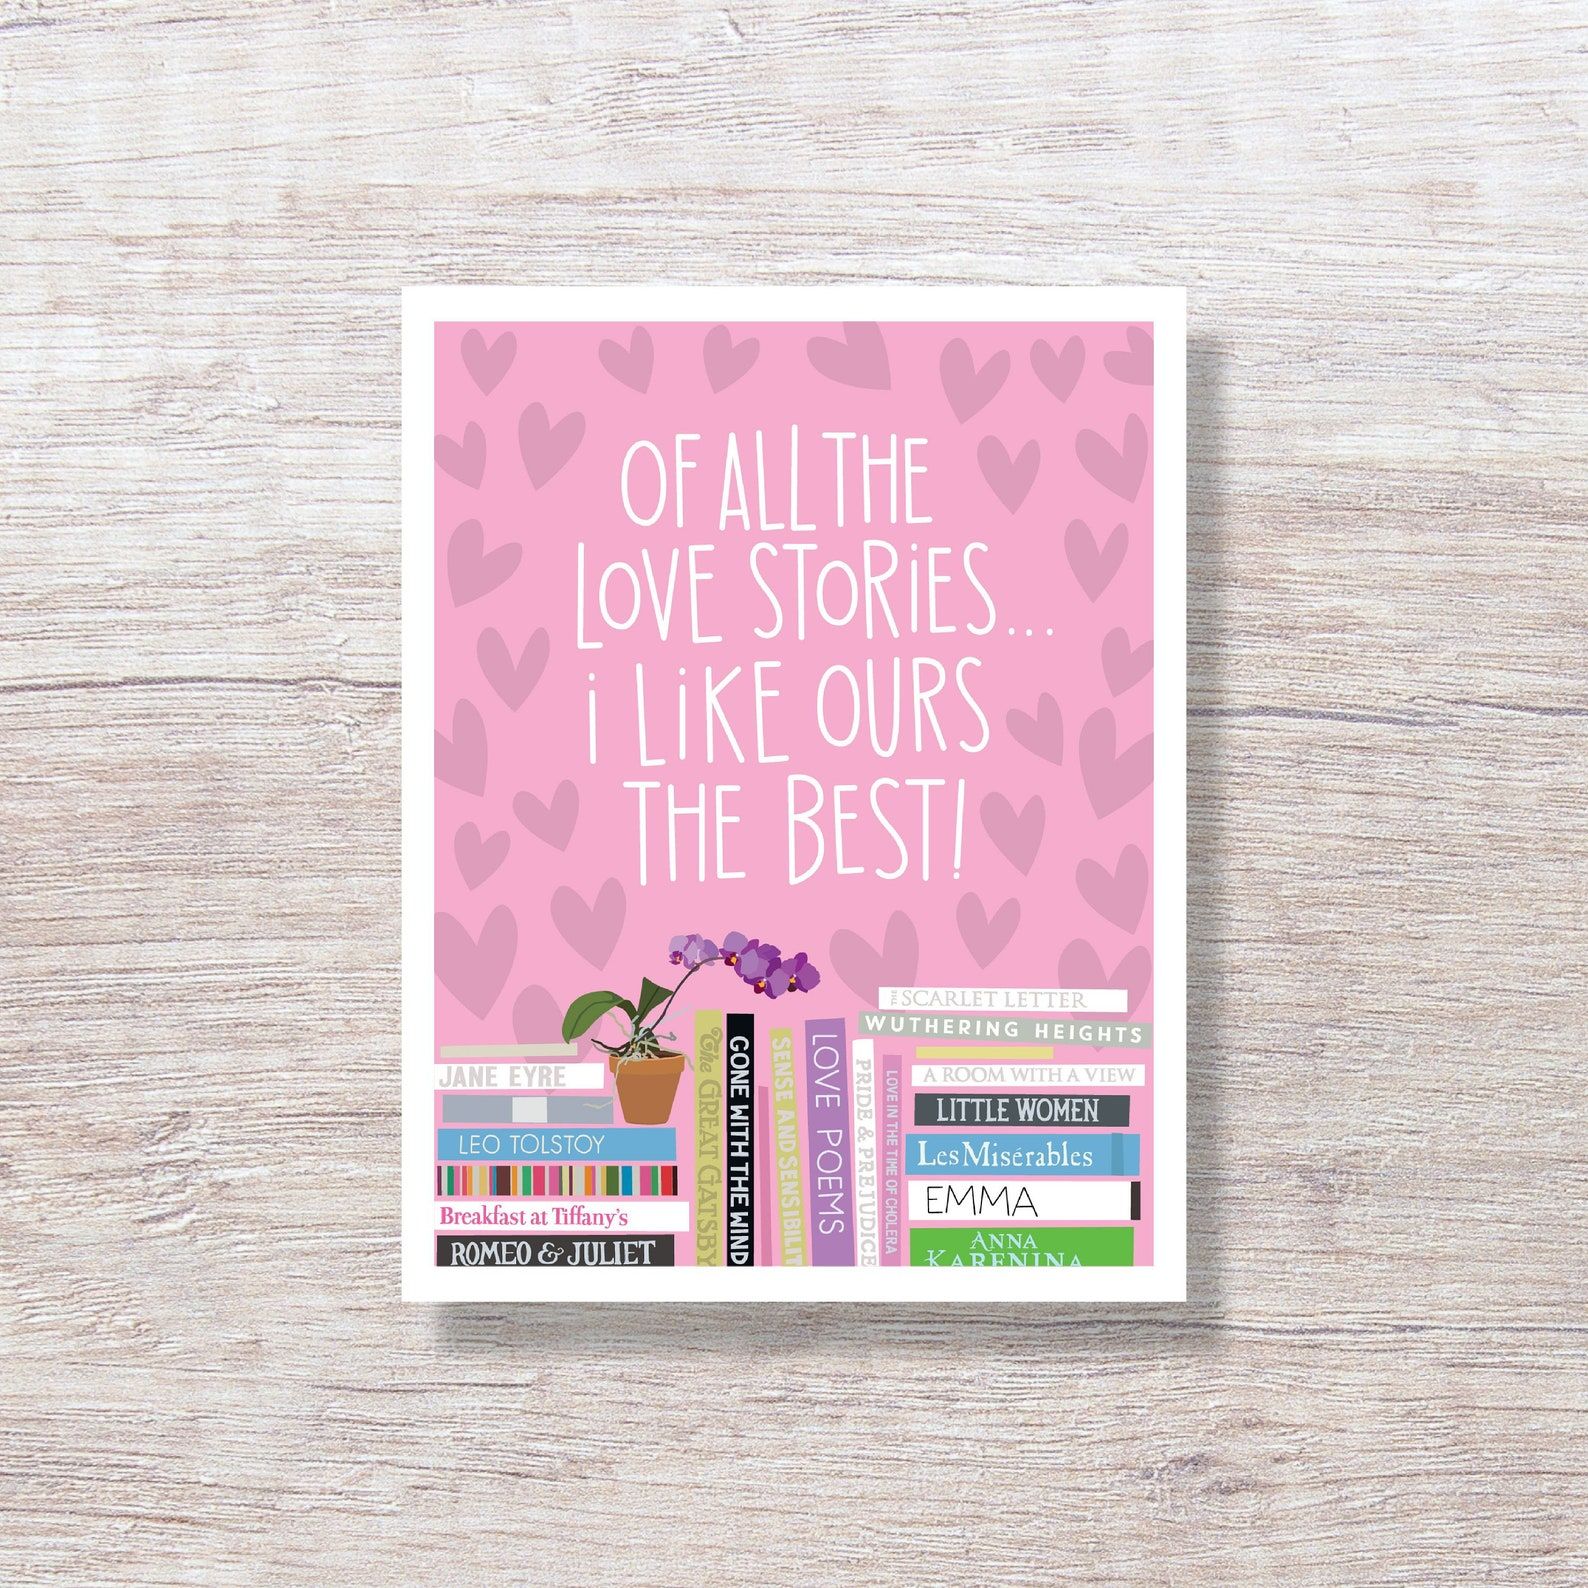 a pink card with stacks of romantic books that the words "Of all the love stories, I like ours the best"